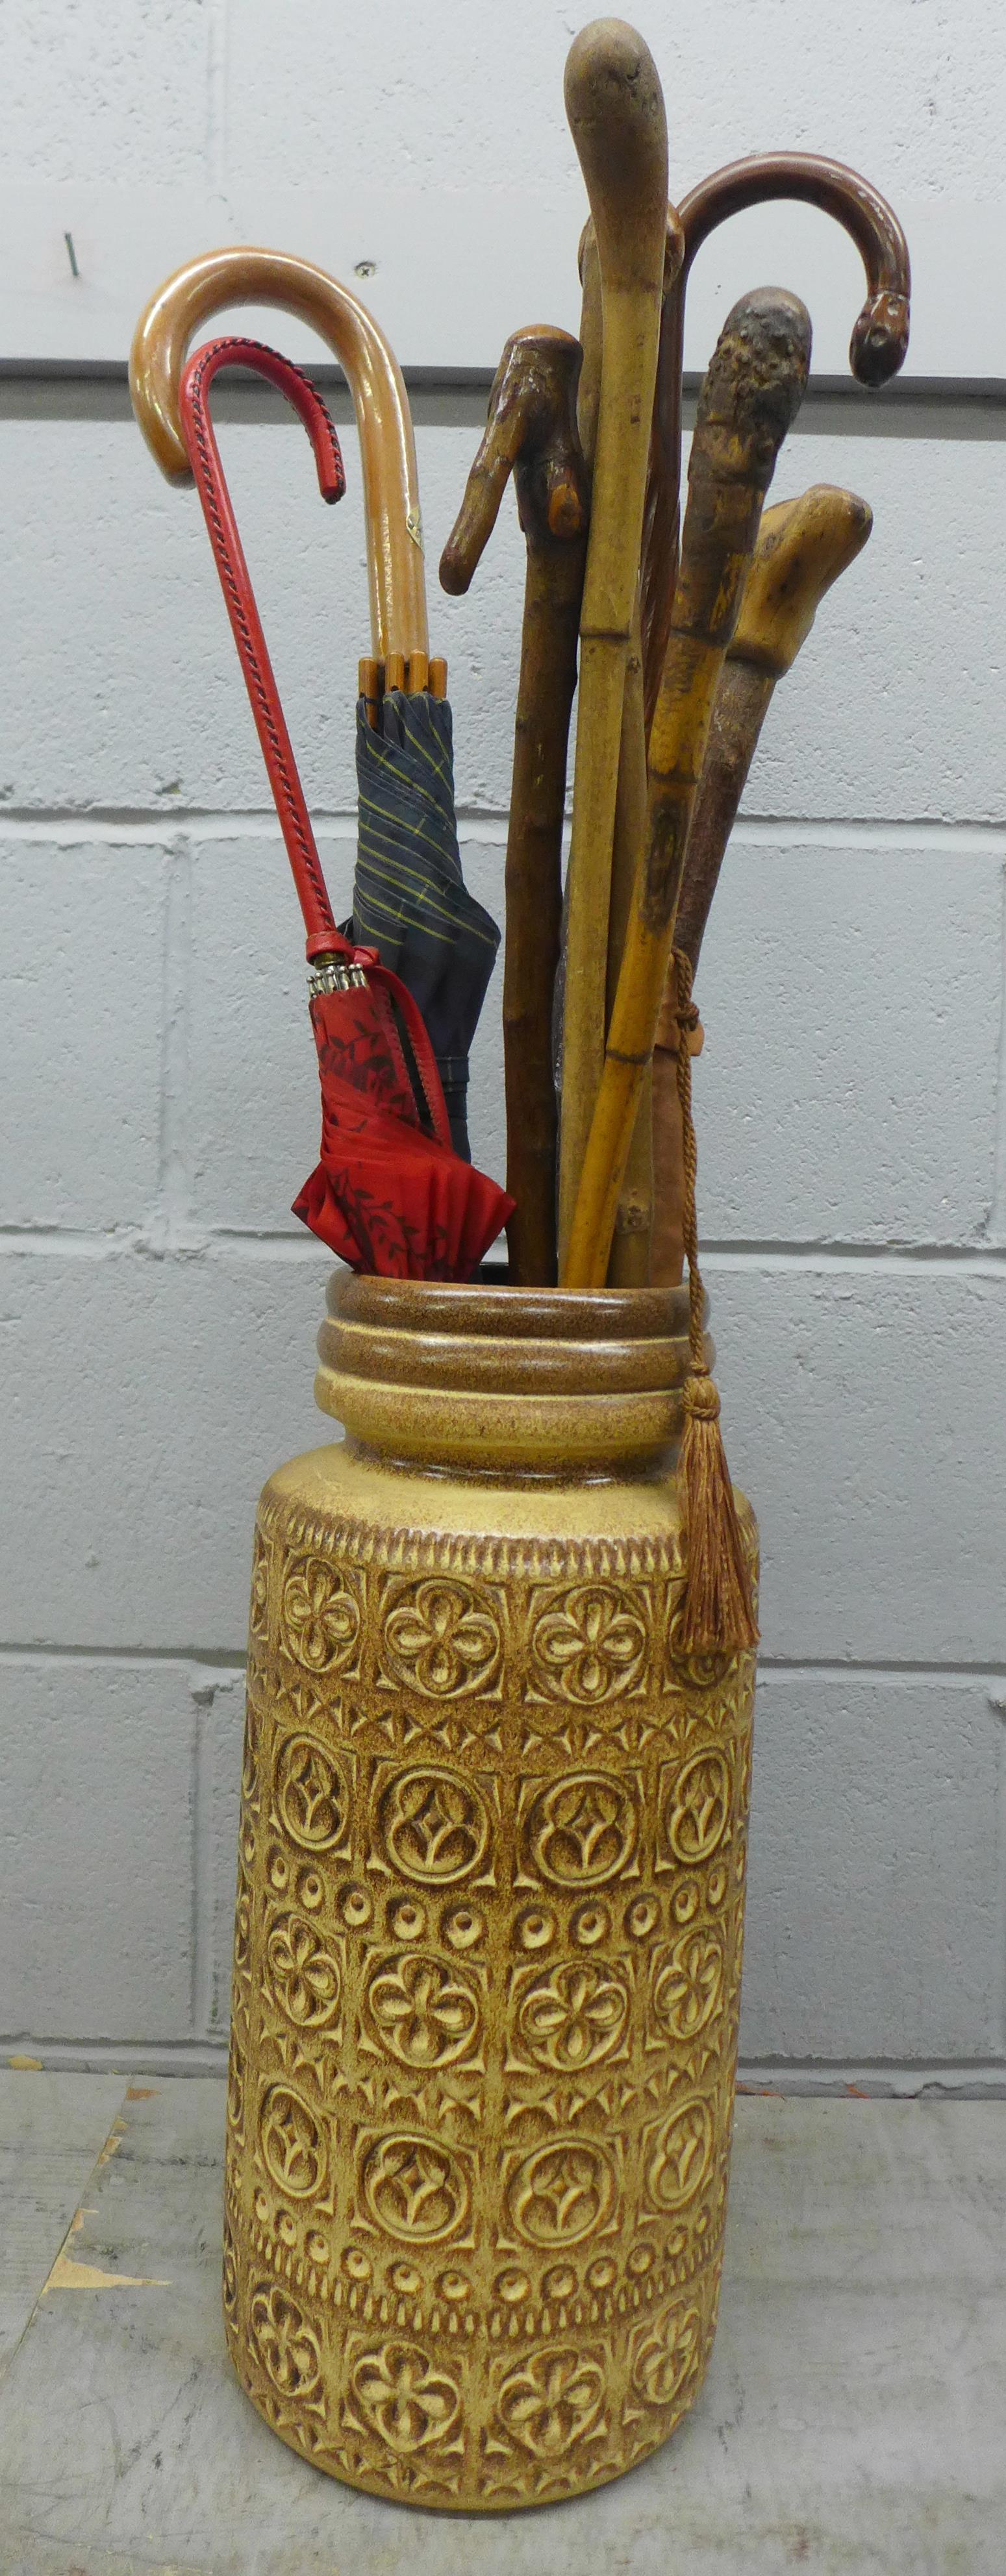 A West German vase/stick stand with a collection of walking sticks and umbrellas